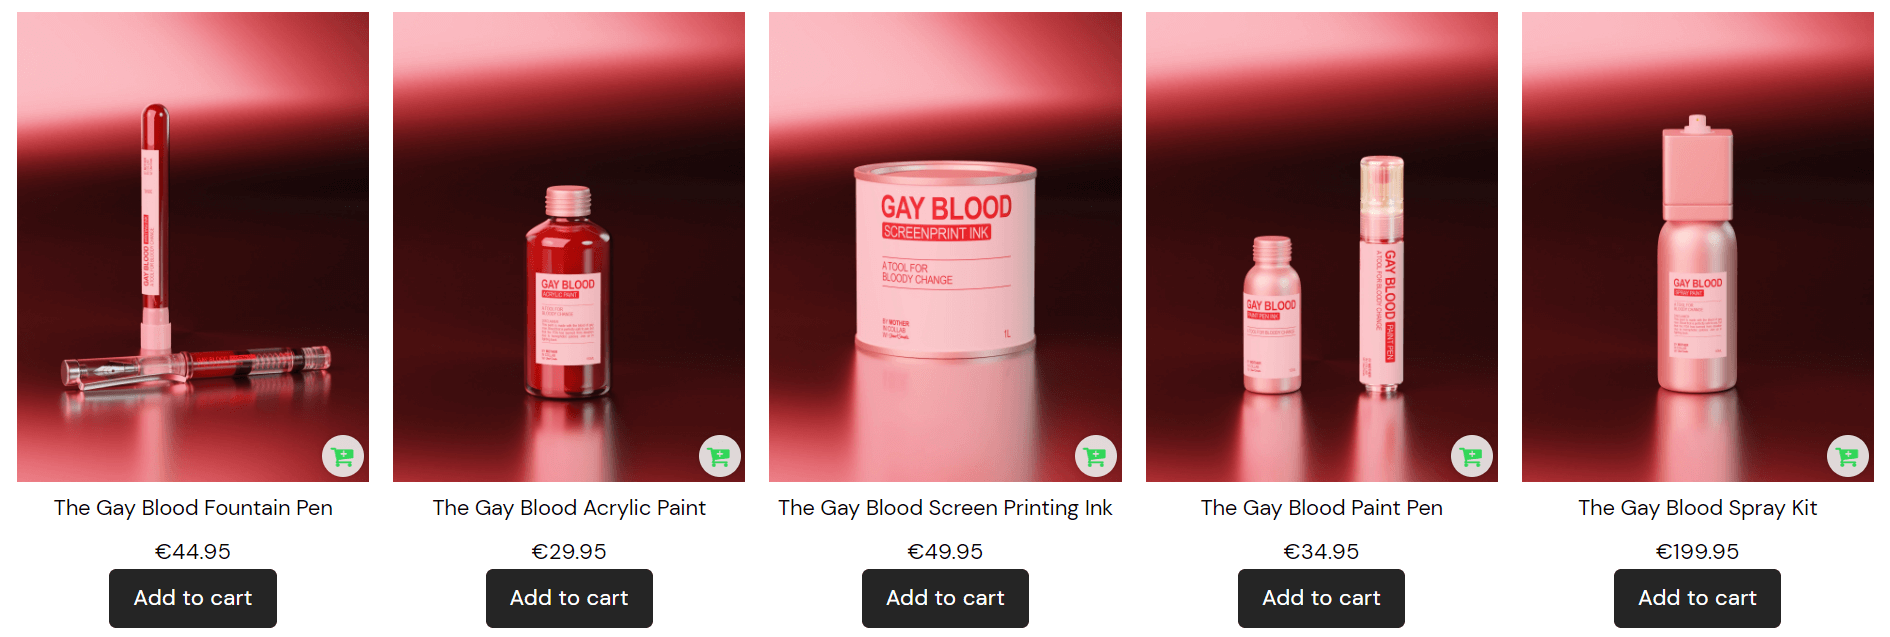 the-gay-blood